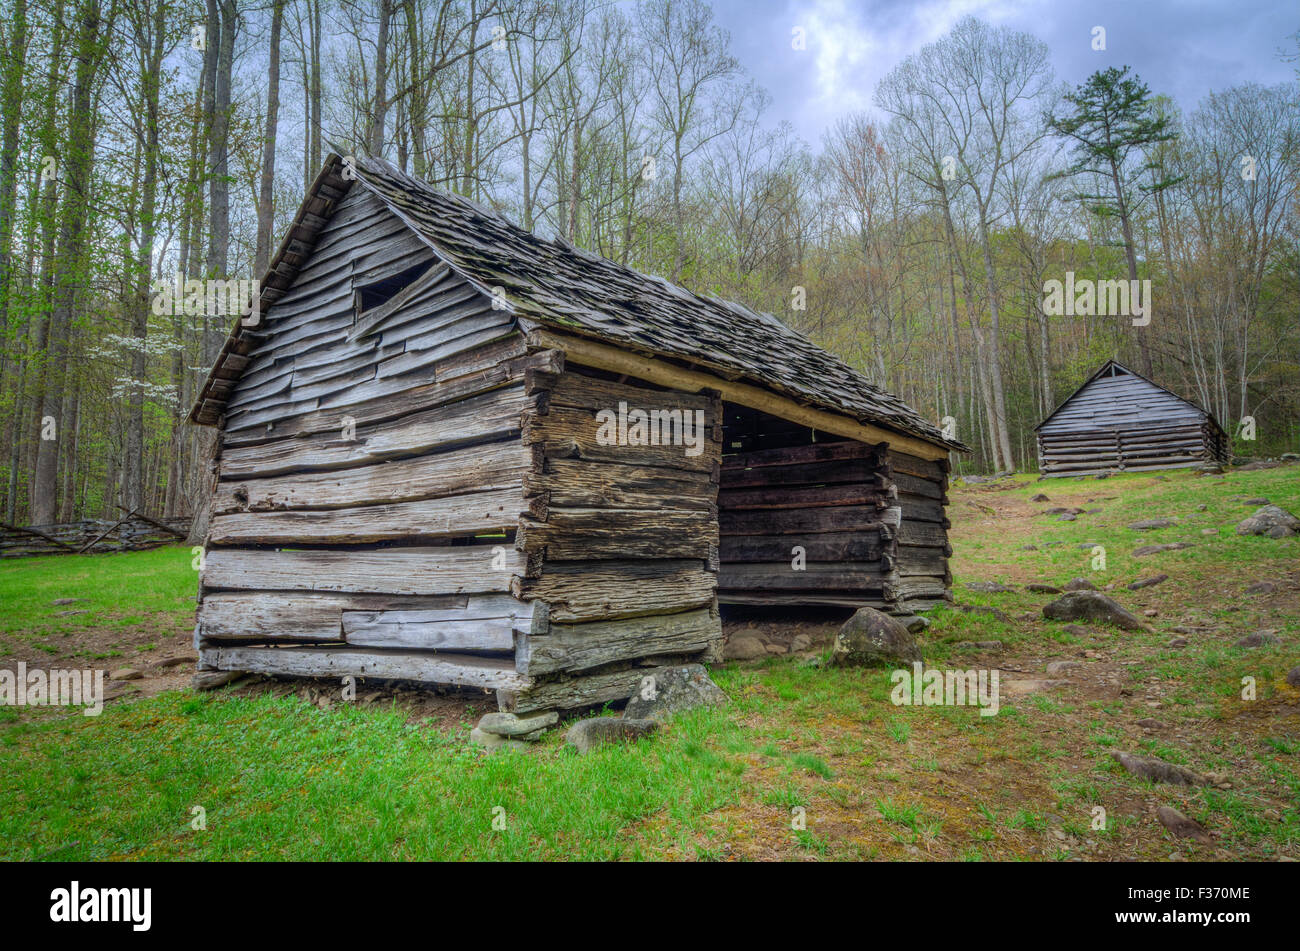 Barns in the Great Smoky Mountains National Park Stock Photo